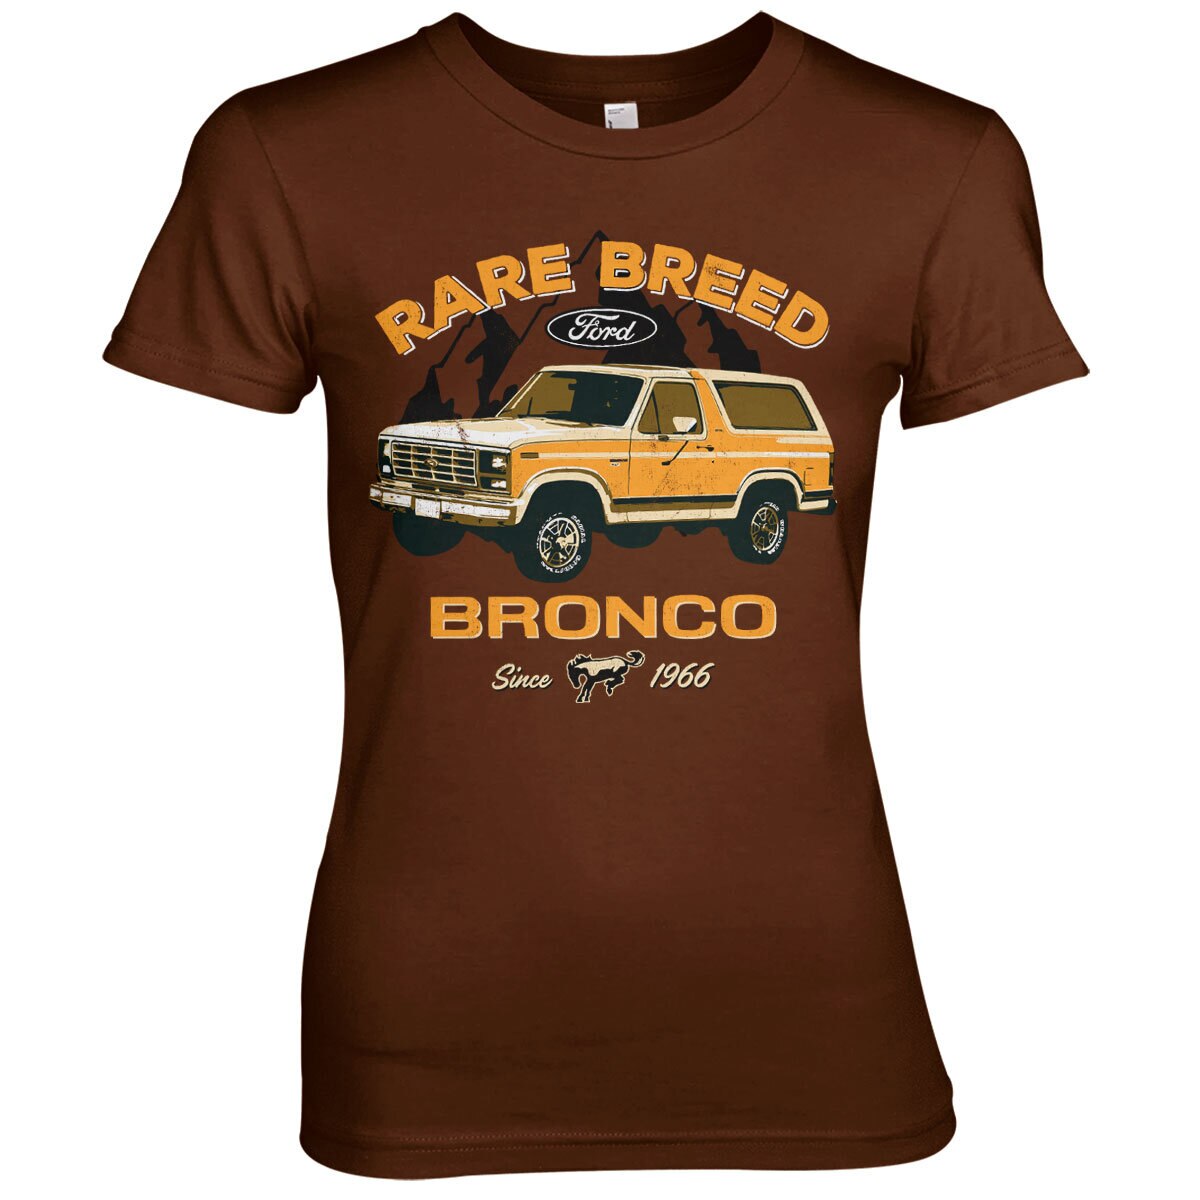 Ford Bronco - Rare Breed Girly Tee